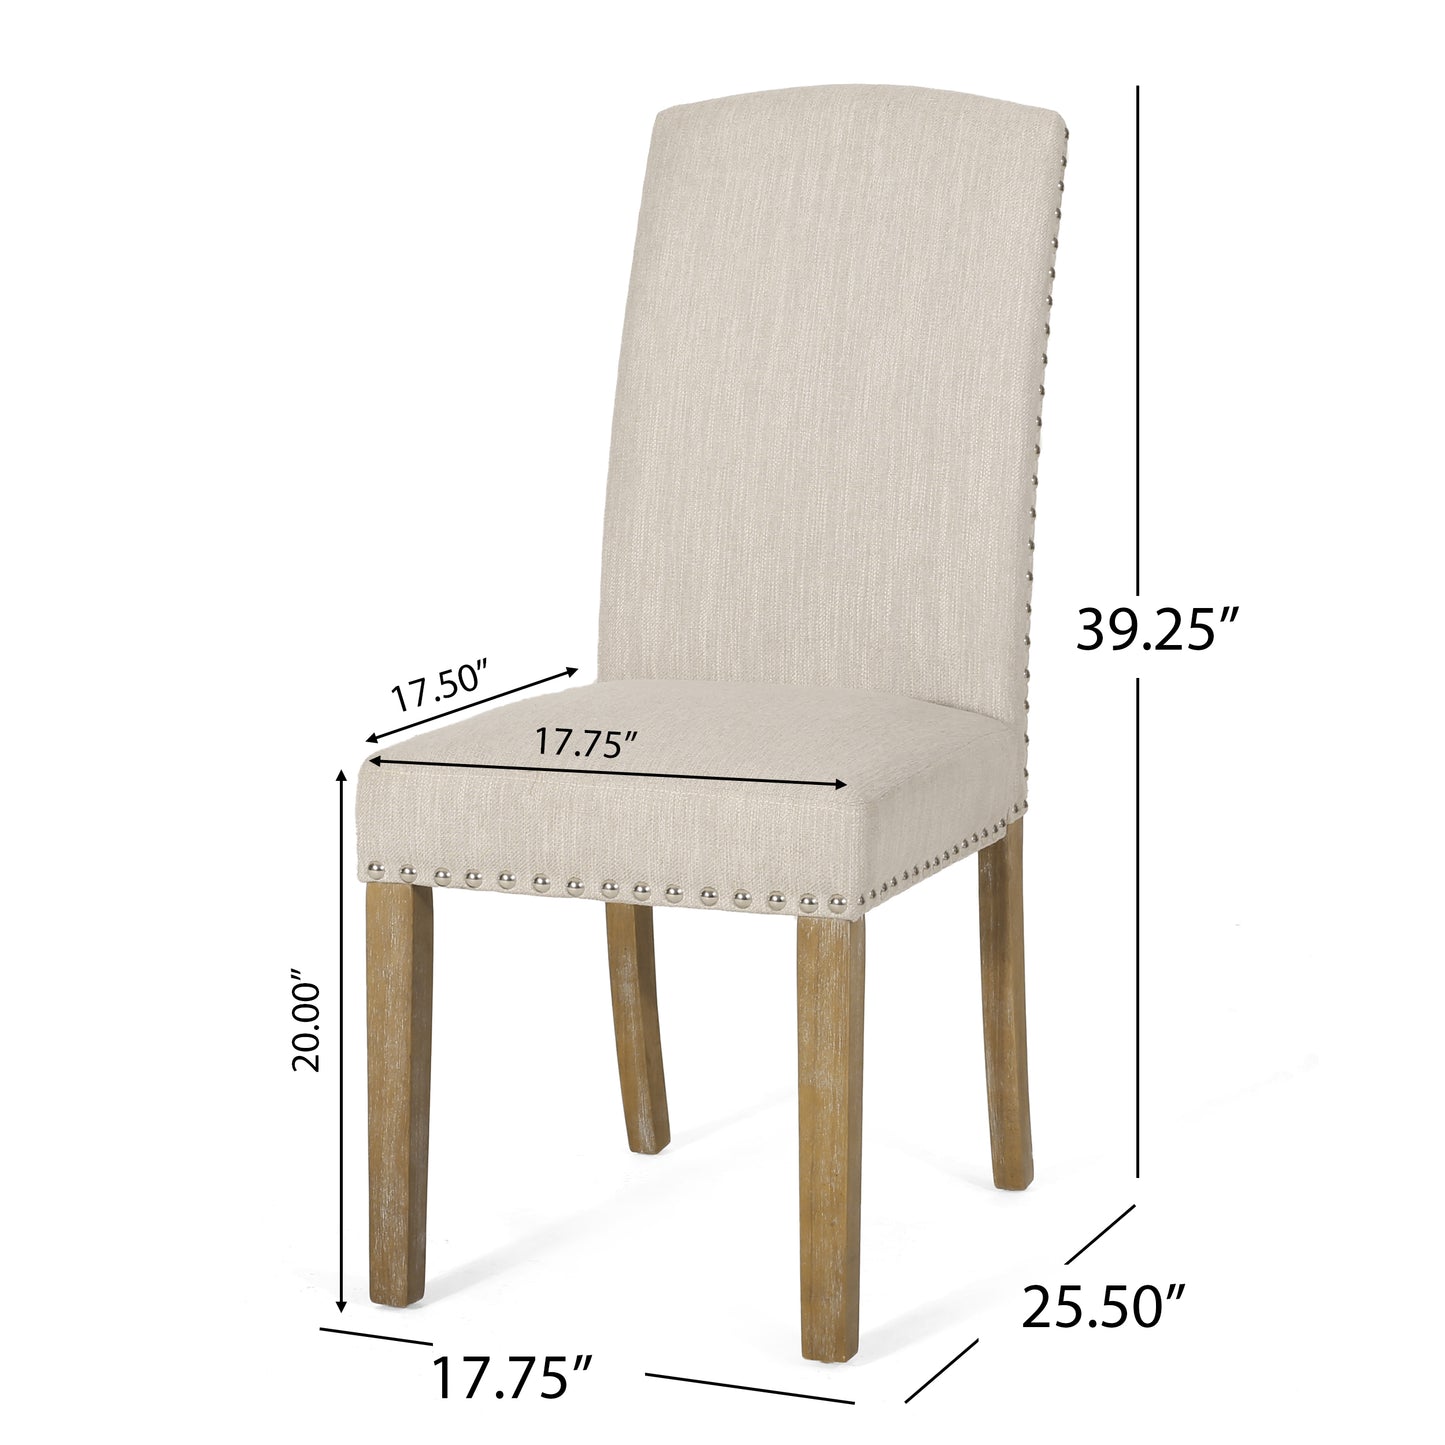 Depue Contemporary Fabric Dining Chair with Nailhead Trim, Set of 2